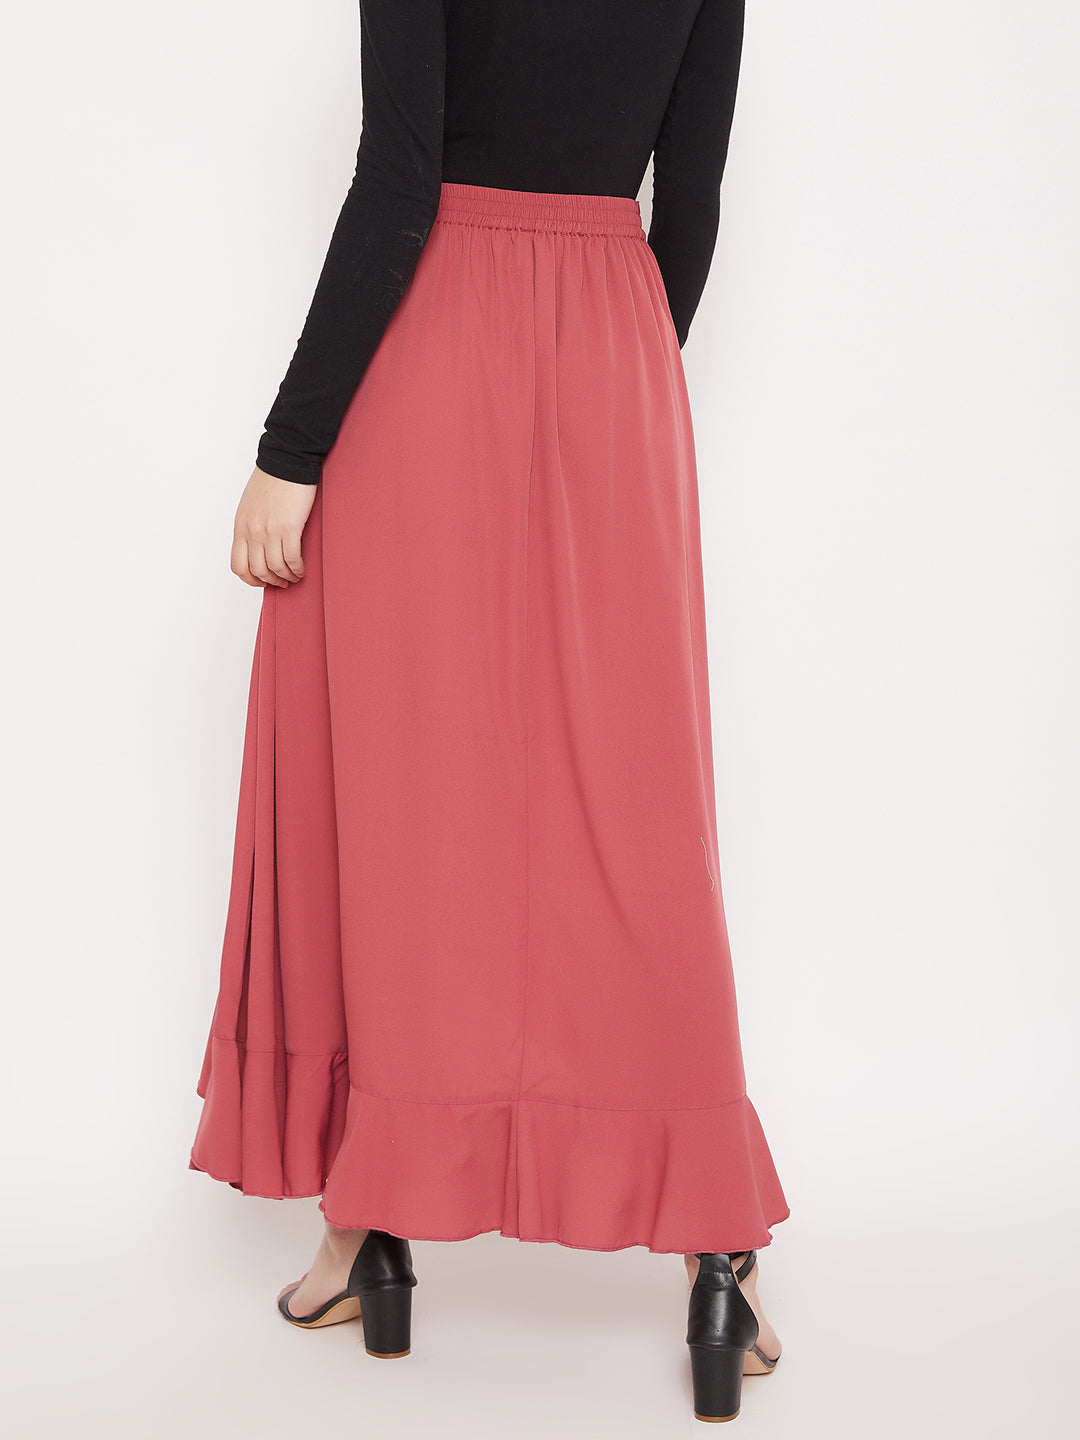 Berrylush Women Solid Pink Waist Tie-Up Ruffled Maxi Skirt With Attached Trousers